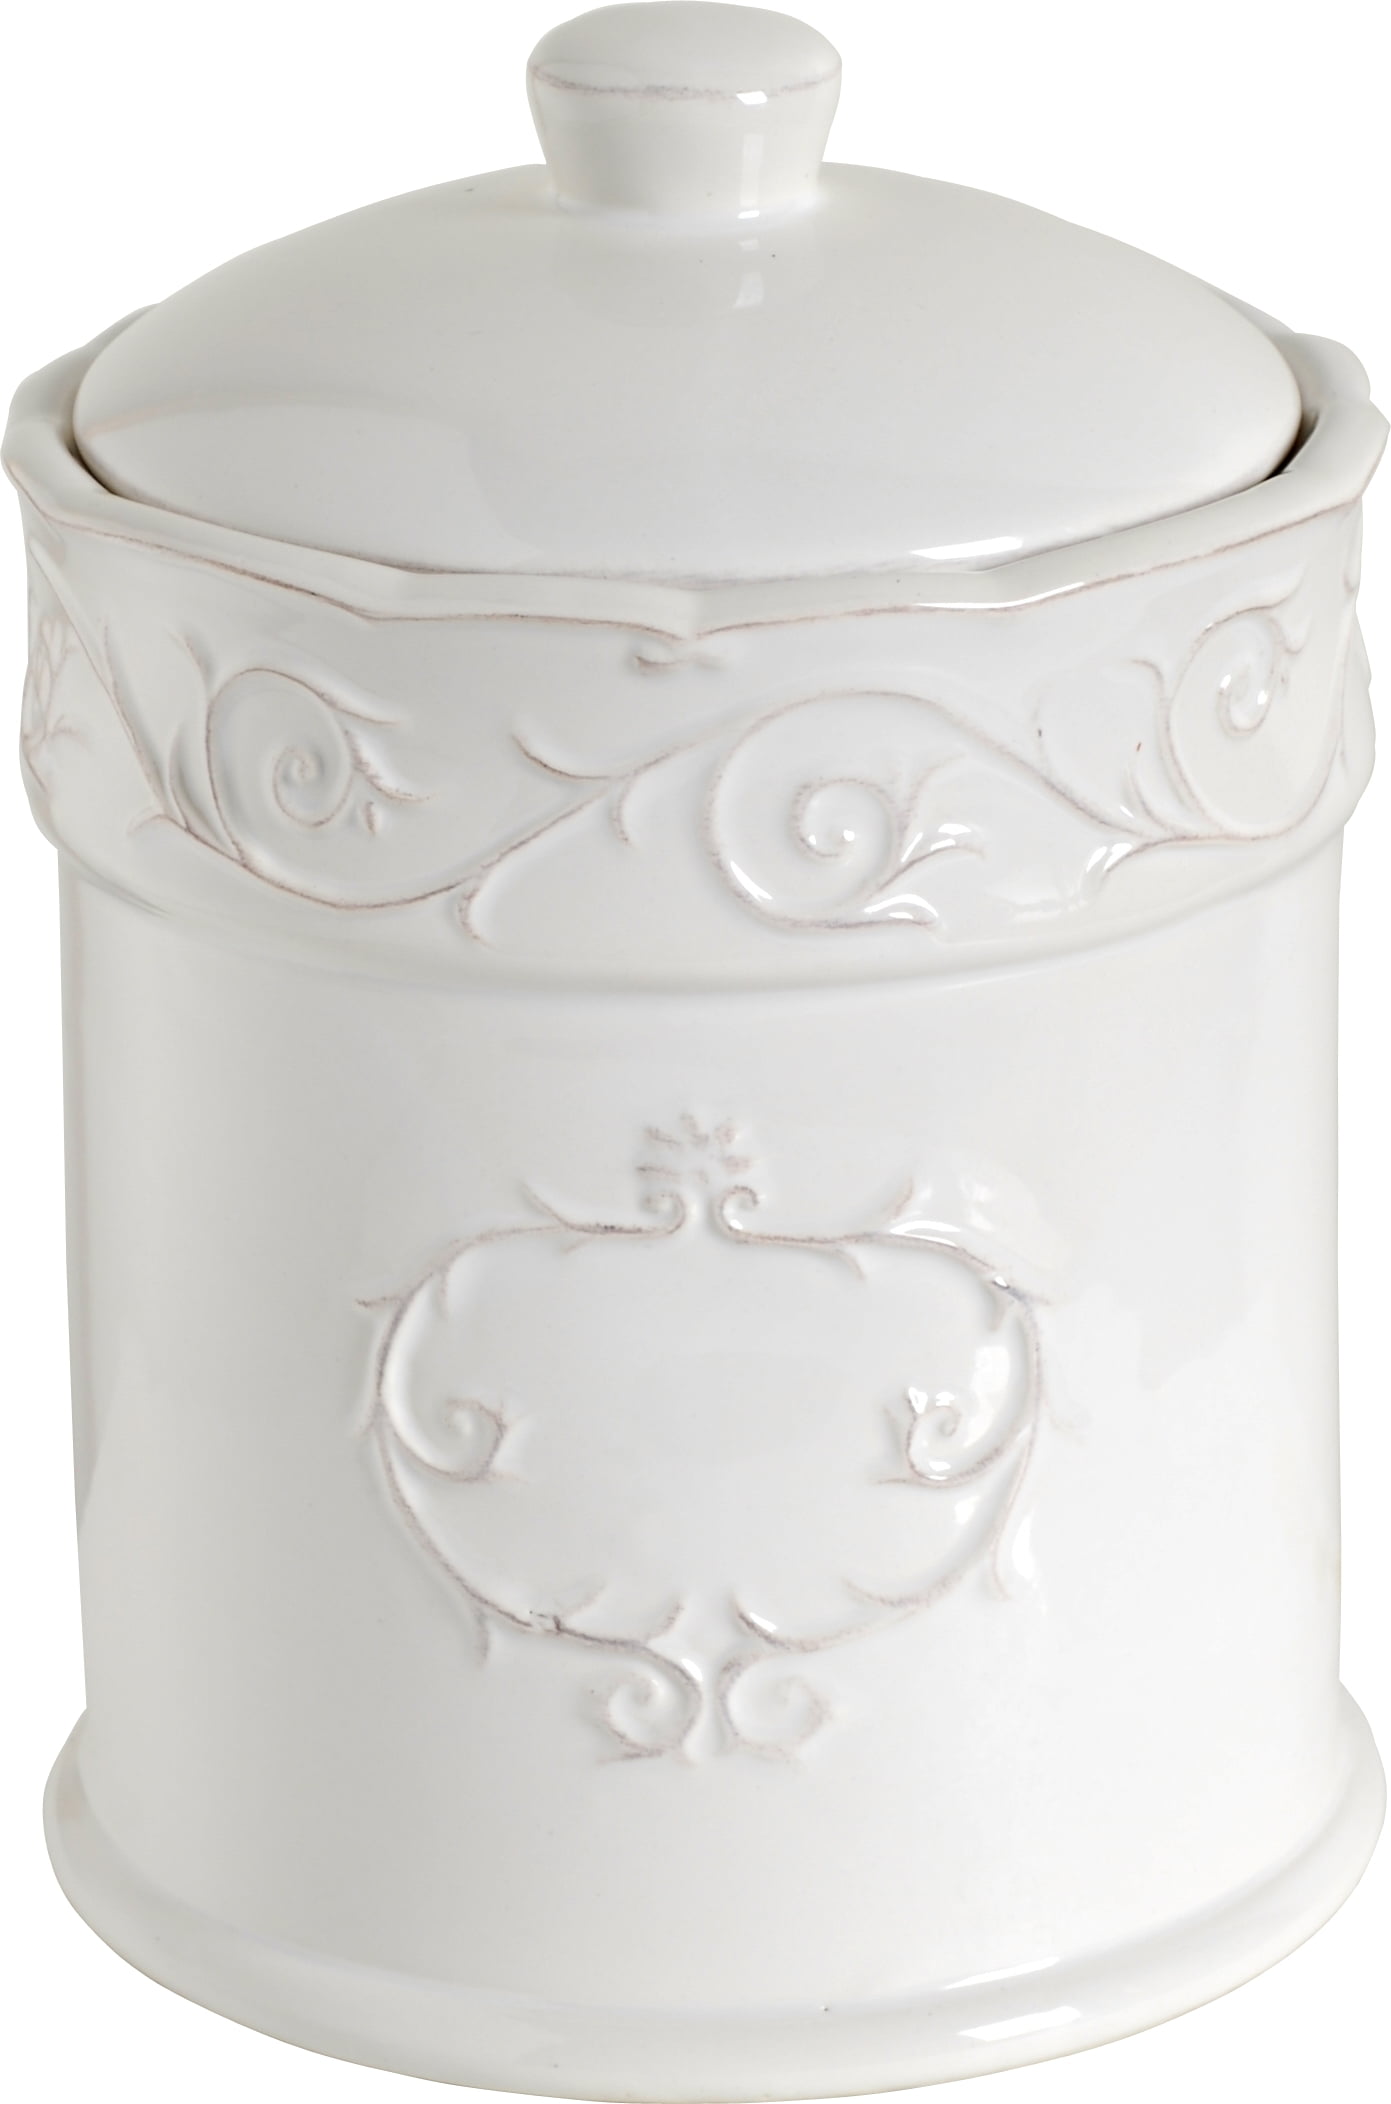 Ceramic Canister Jar With Rubber Seal, White